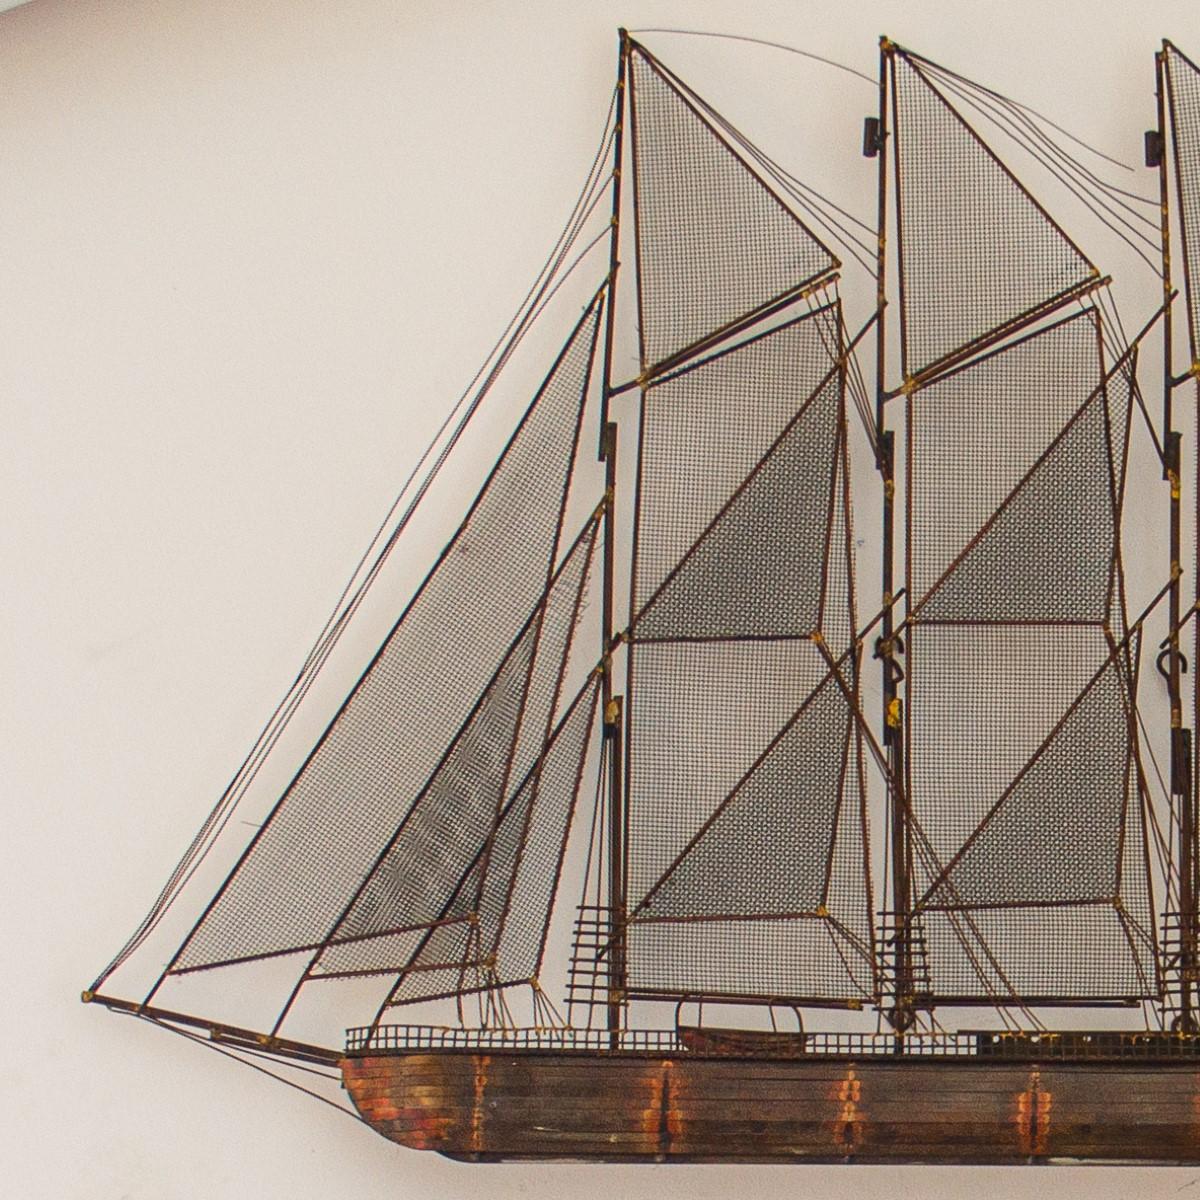 Brutalist Wall Sculpture of a Brig Under Full Sale by Curtis Jere 1975, signed